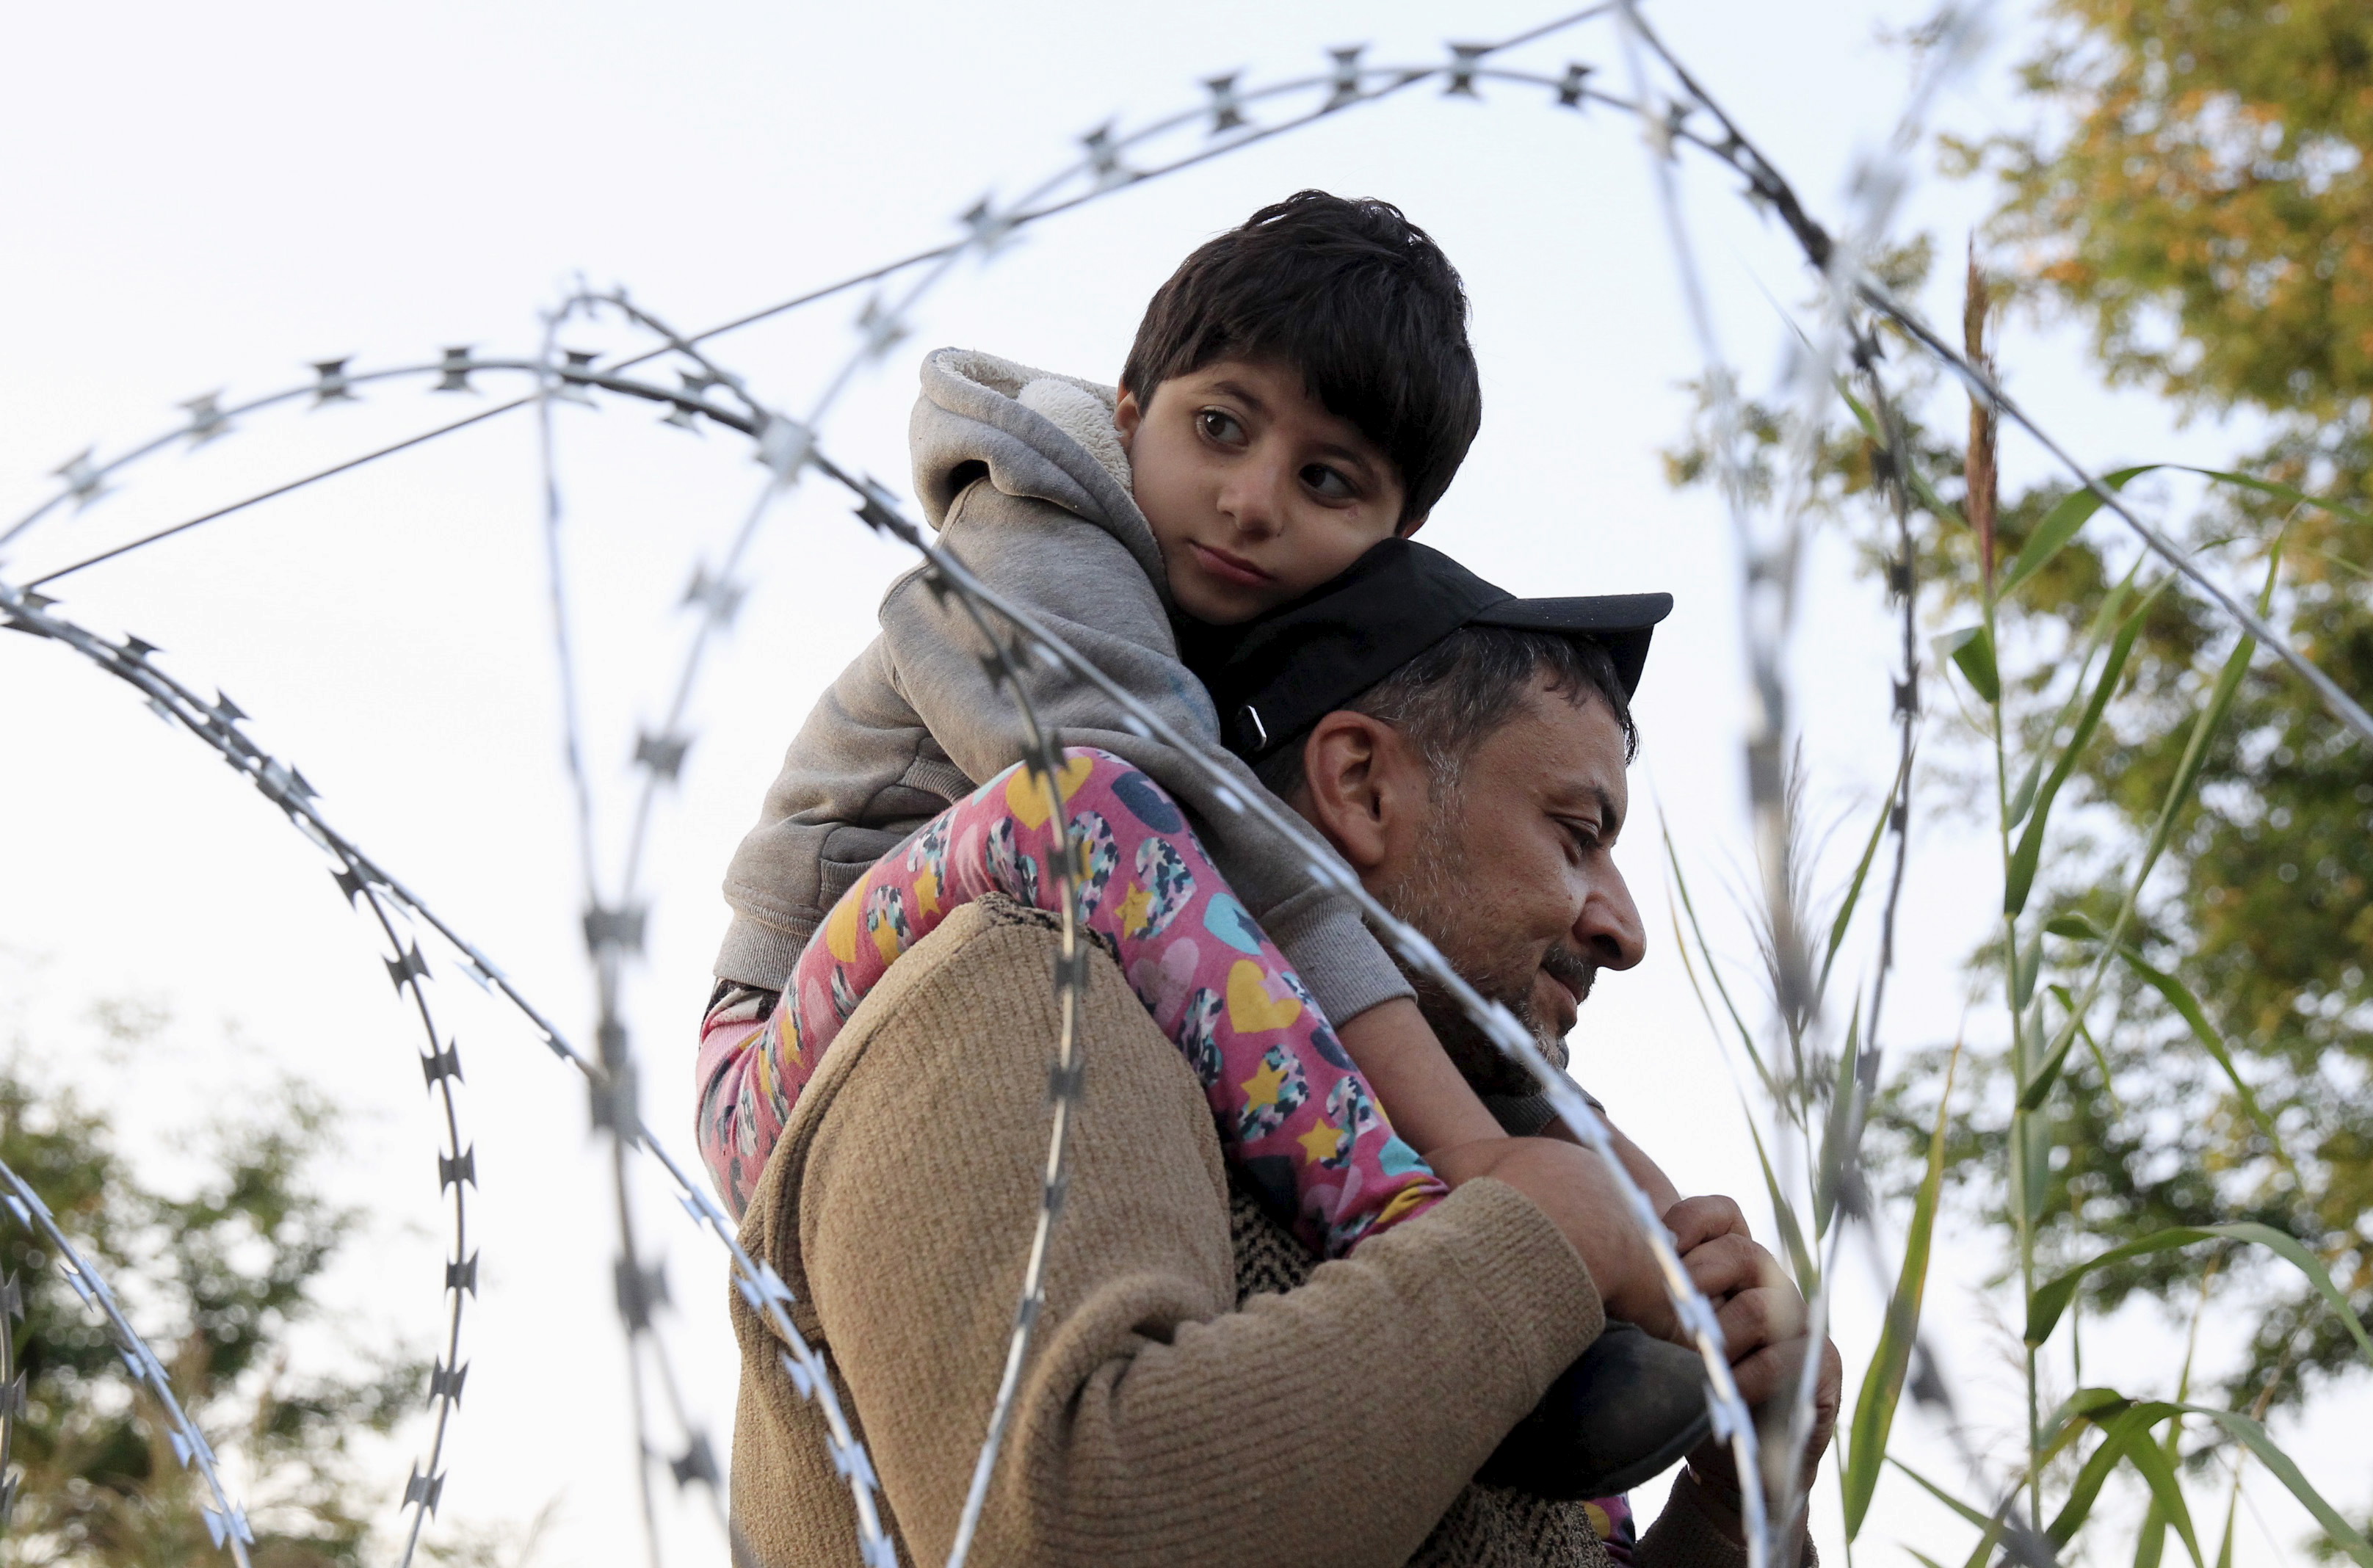 A Syrian migrant with a boy, on the Serbian side of the border with Hungary, walks behind a razor wire near Roszke, Hungary August 28, 2015.